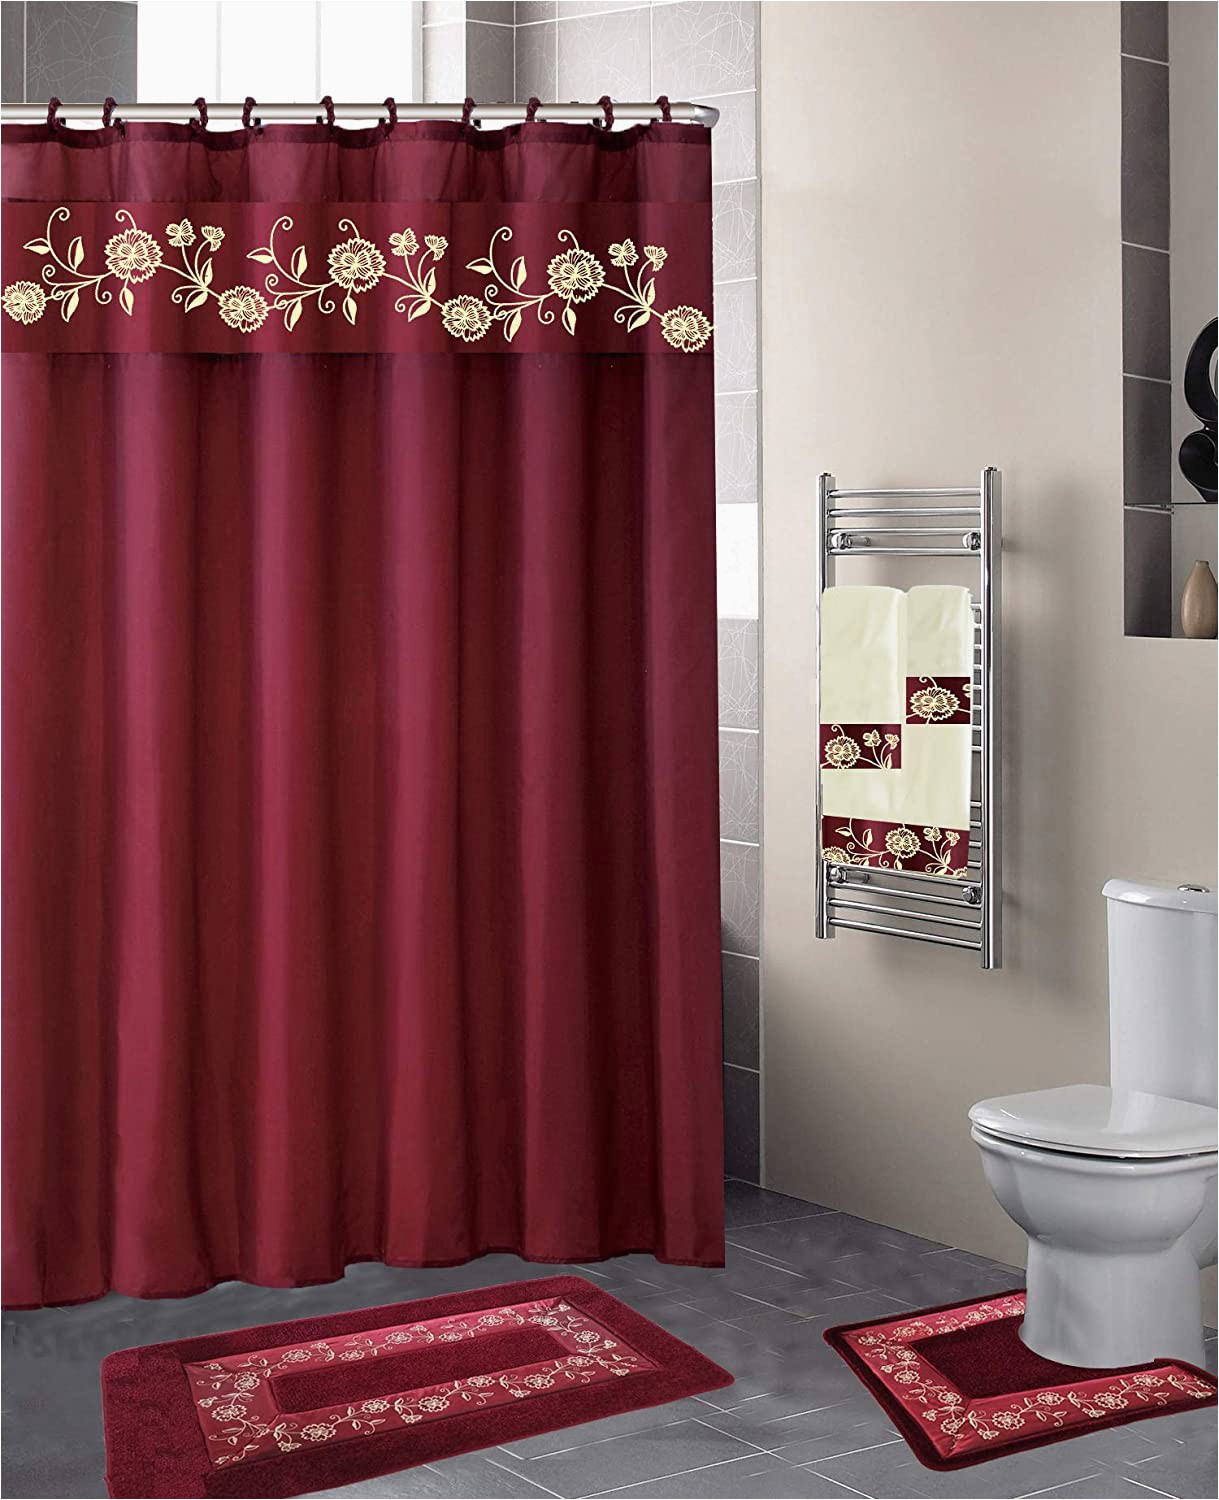 Burgundy Color Bath Rugs Luxury Home Collection 18 Pc Bath Rug Set Embroidery Non Slip Bathroom Rug Mats and Rug Contour and Shower Curtain and towels and Rings Hooks and